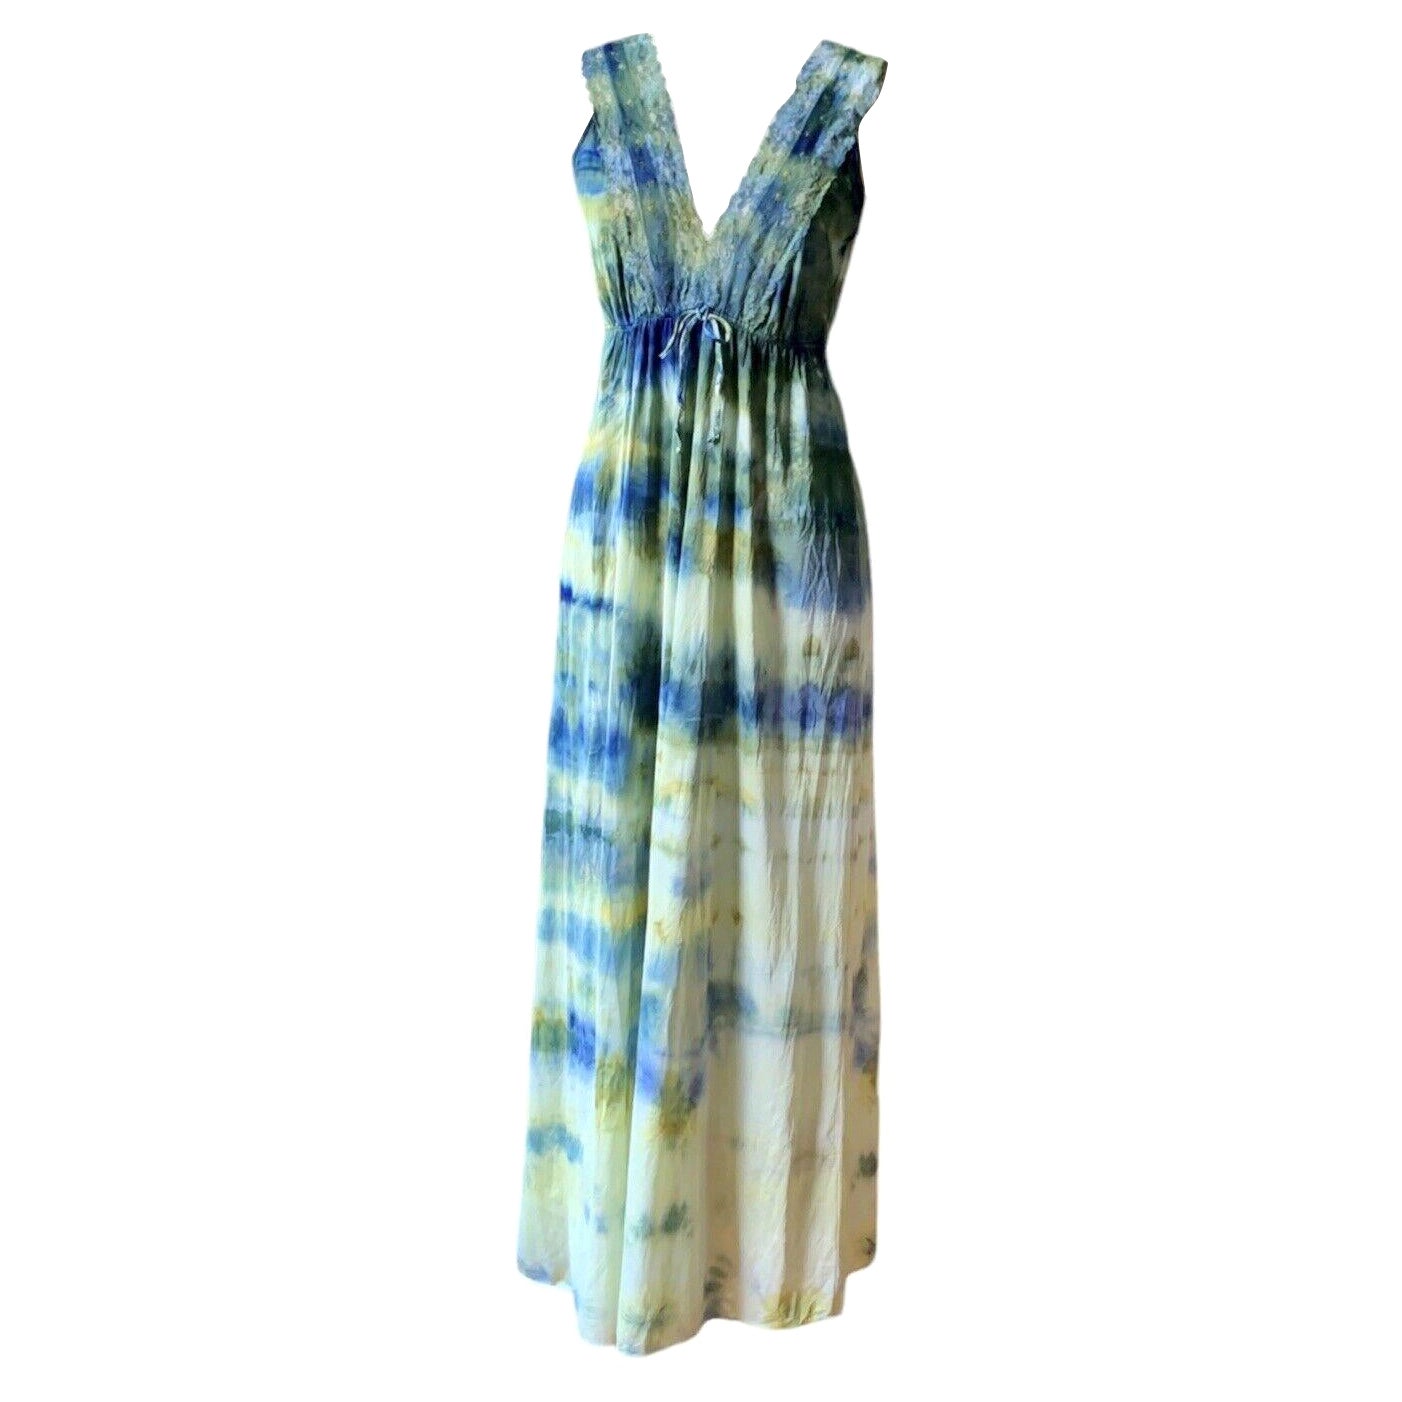 DYED PETALS Vintage Hand Botanically Dyed Tie-Dyed Slip Dress S/M 36 For Sale